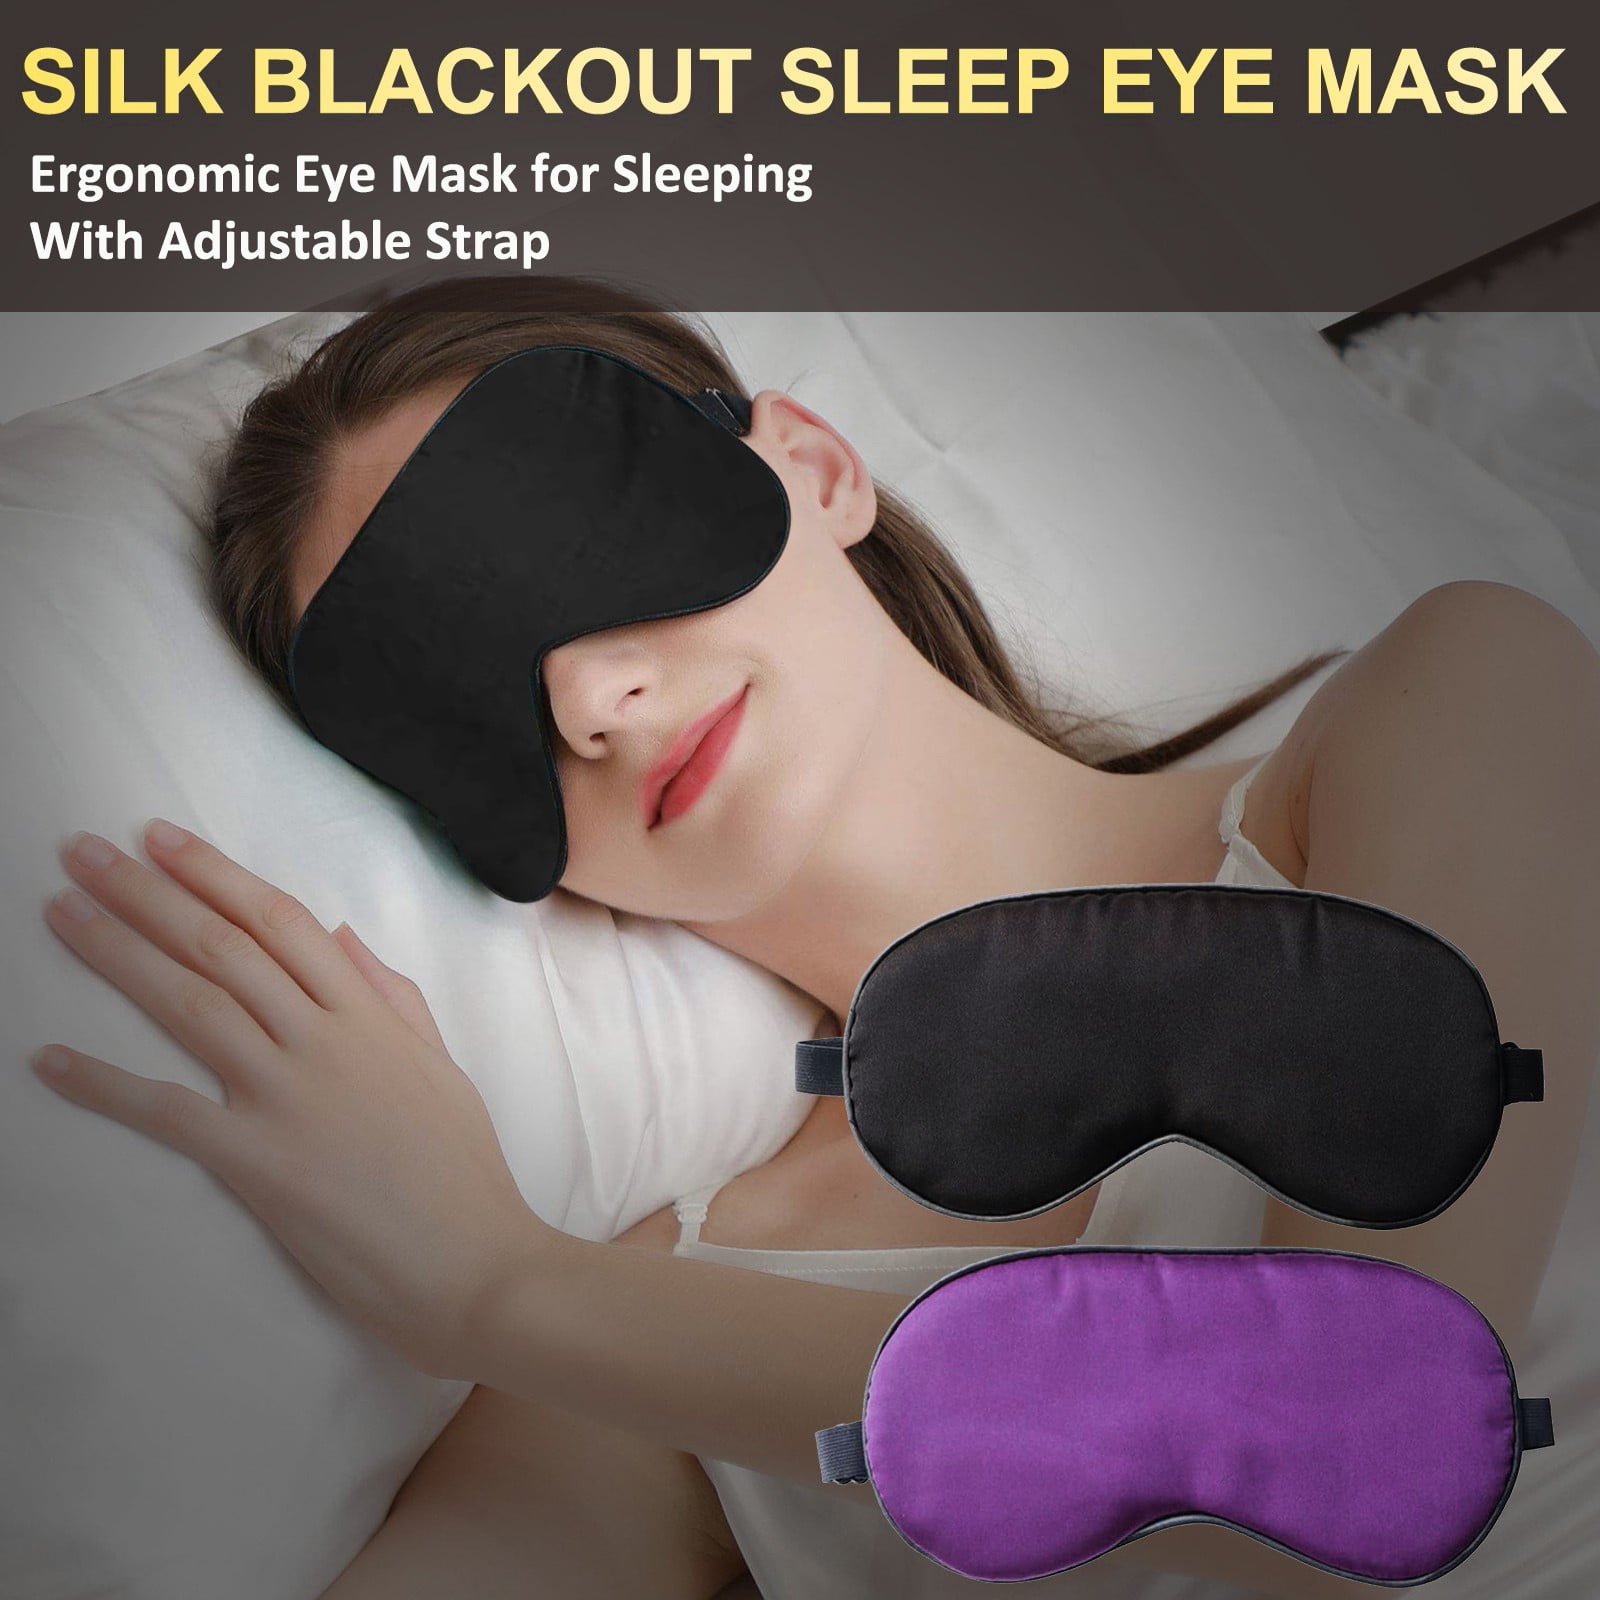 Dropship Travel 3D Eye Mask Sleep Soft Padded Shade Cover Rest Relax  Sleeping Blindfold to Sell Online at a Lower Price